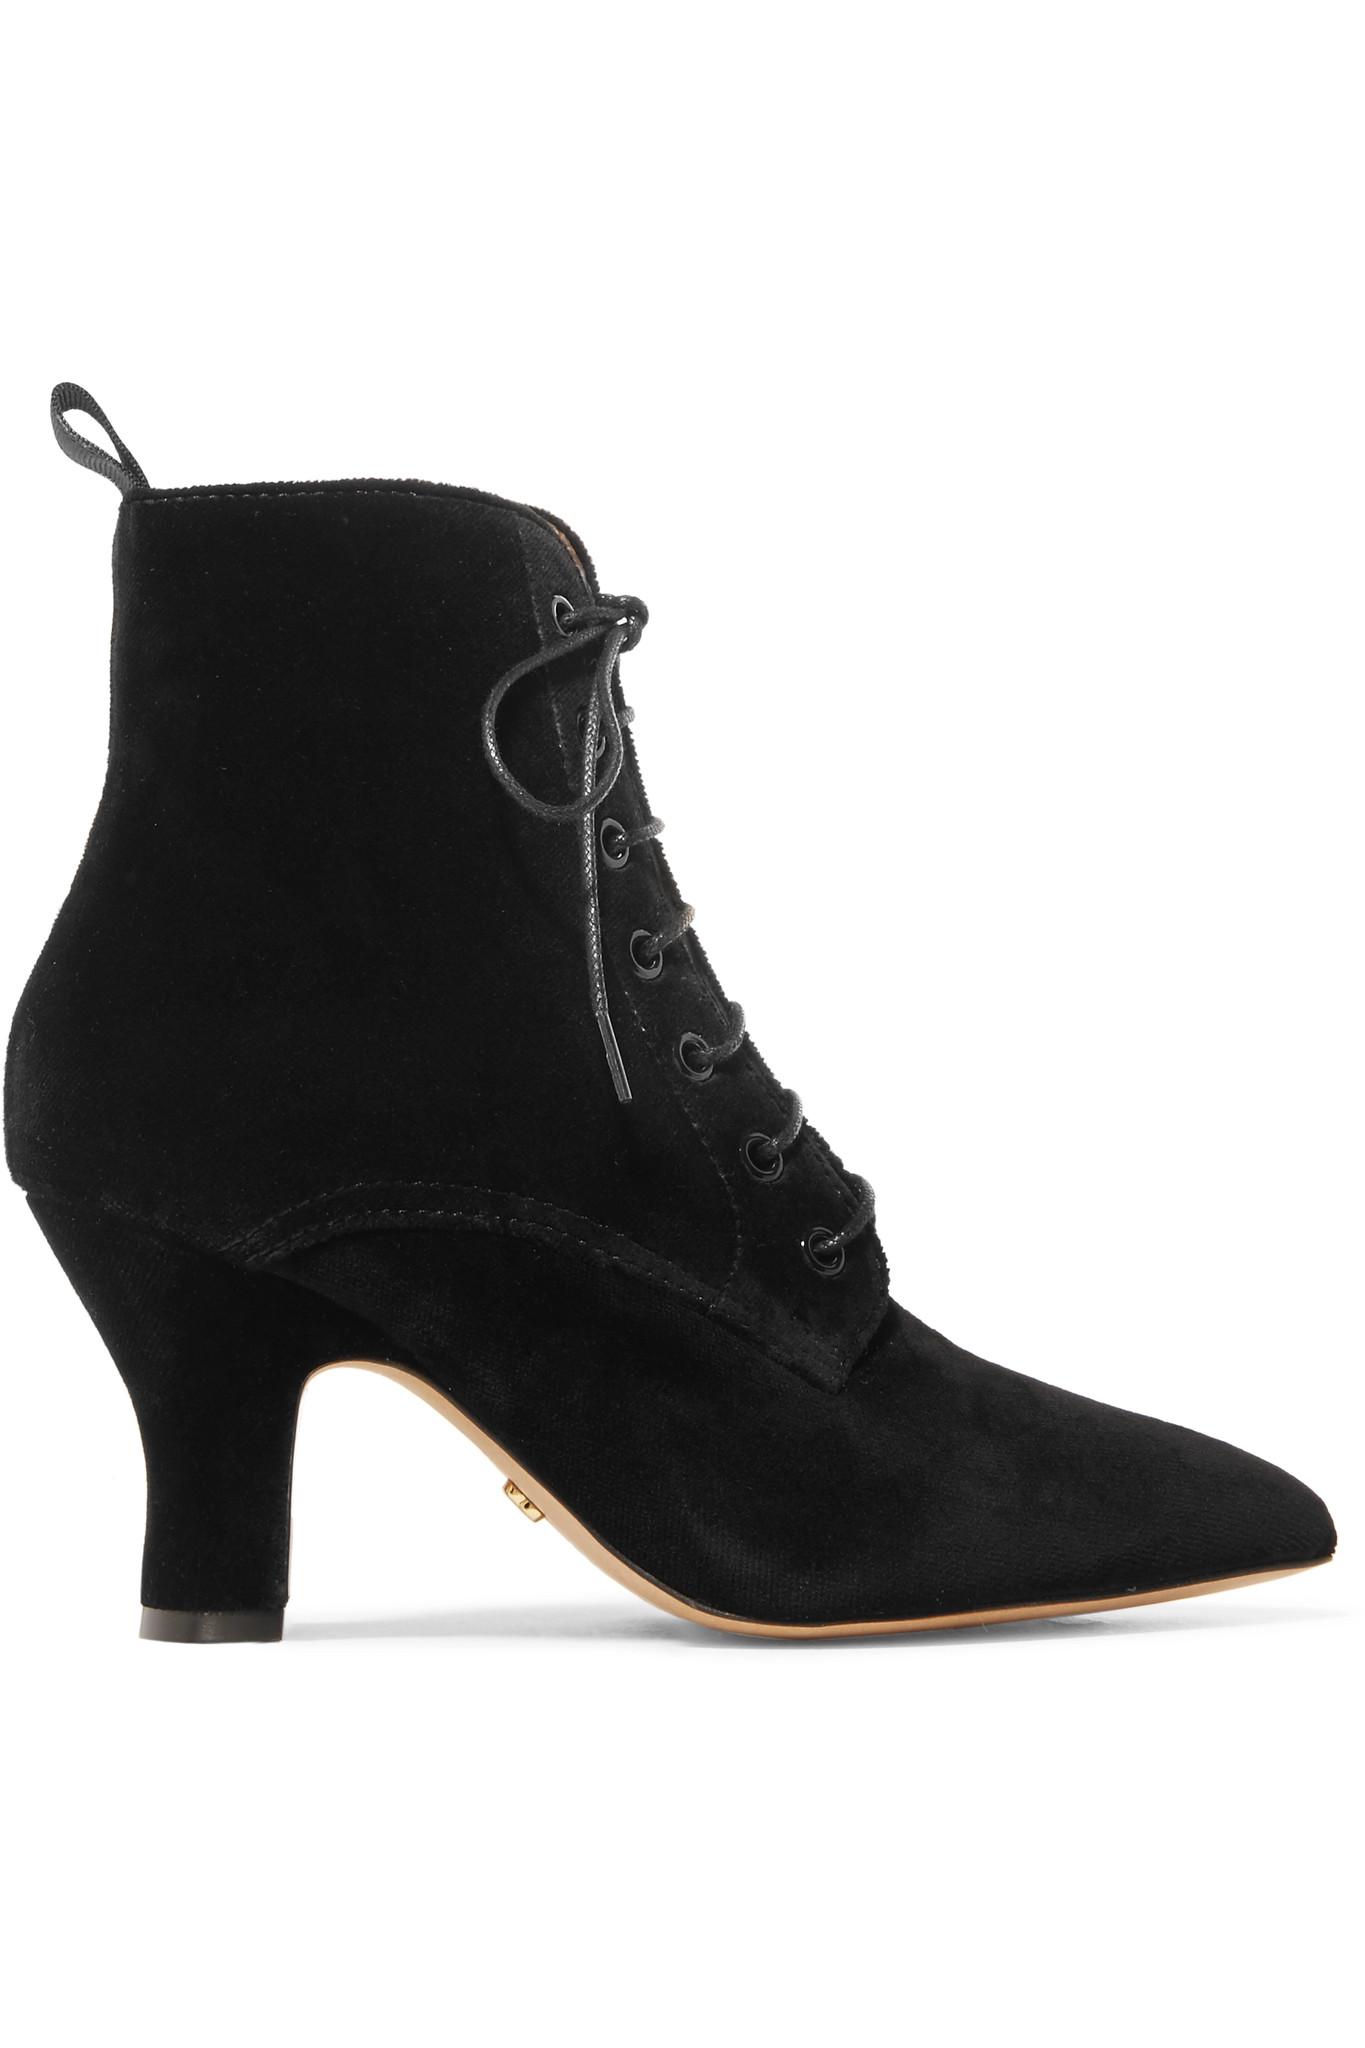 ALEXACHUNG Lace-up Velvet Ankle Boots in Black - Lyst